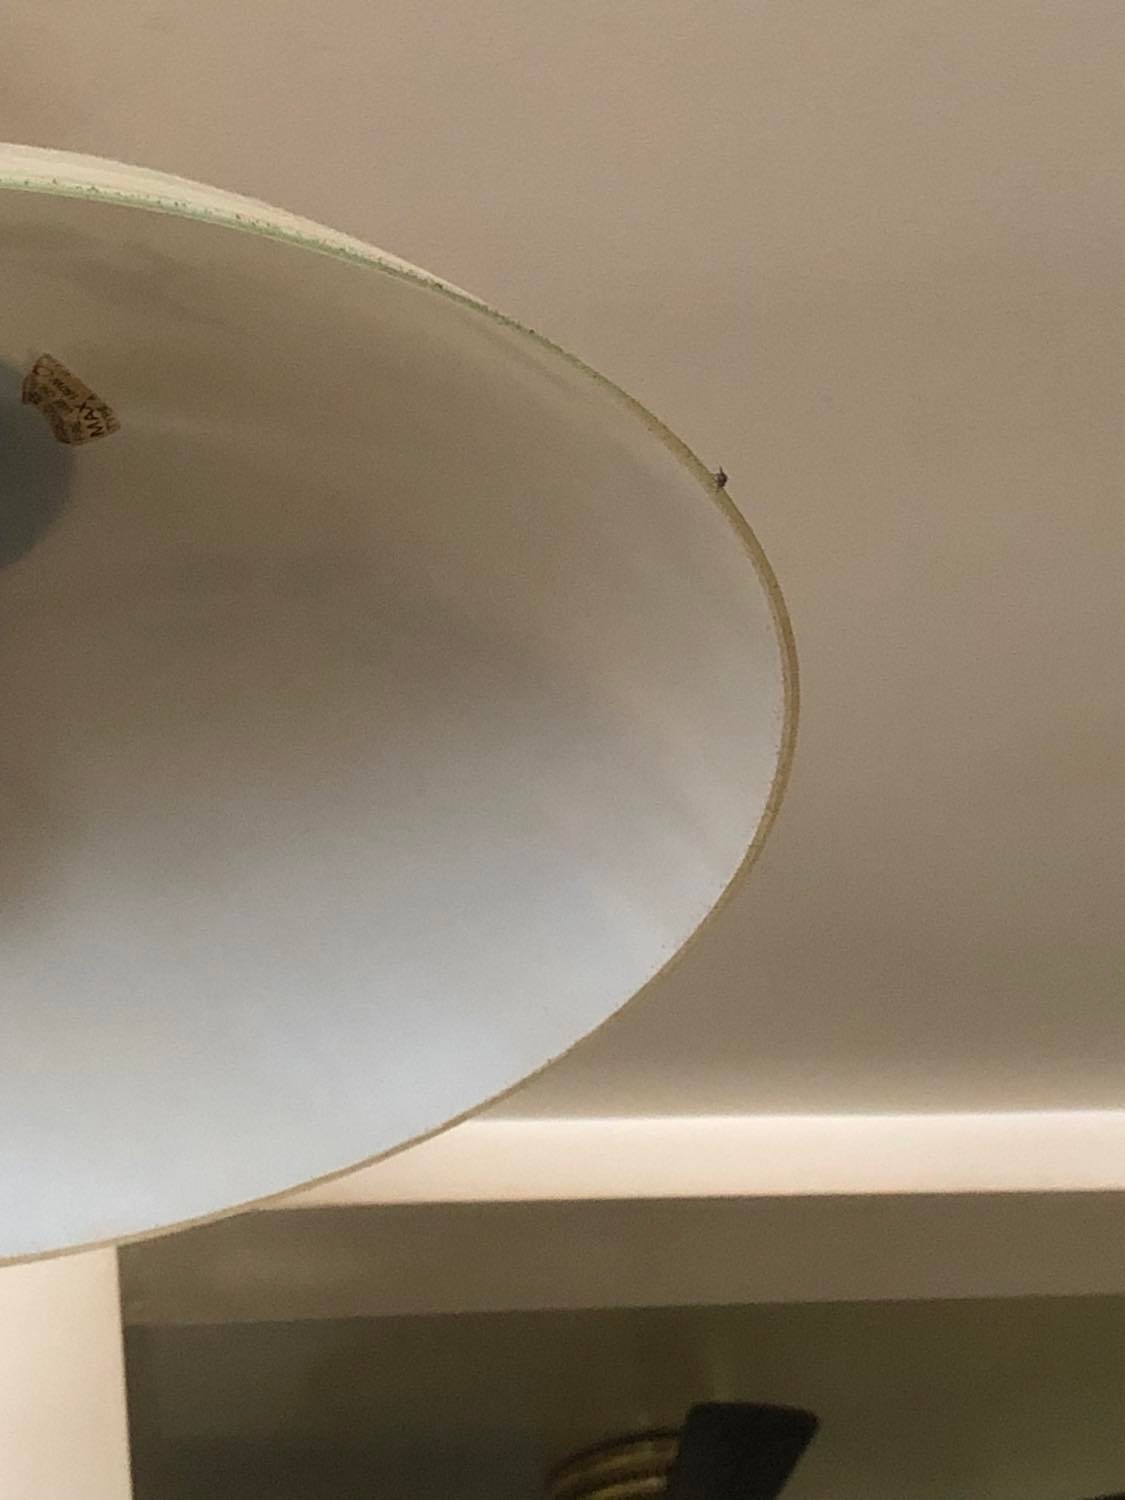 Housefly looking down at me from the lampshade, the picture taken looking up.